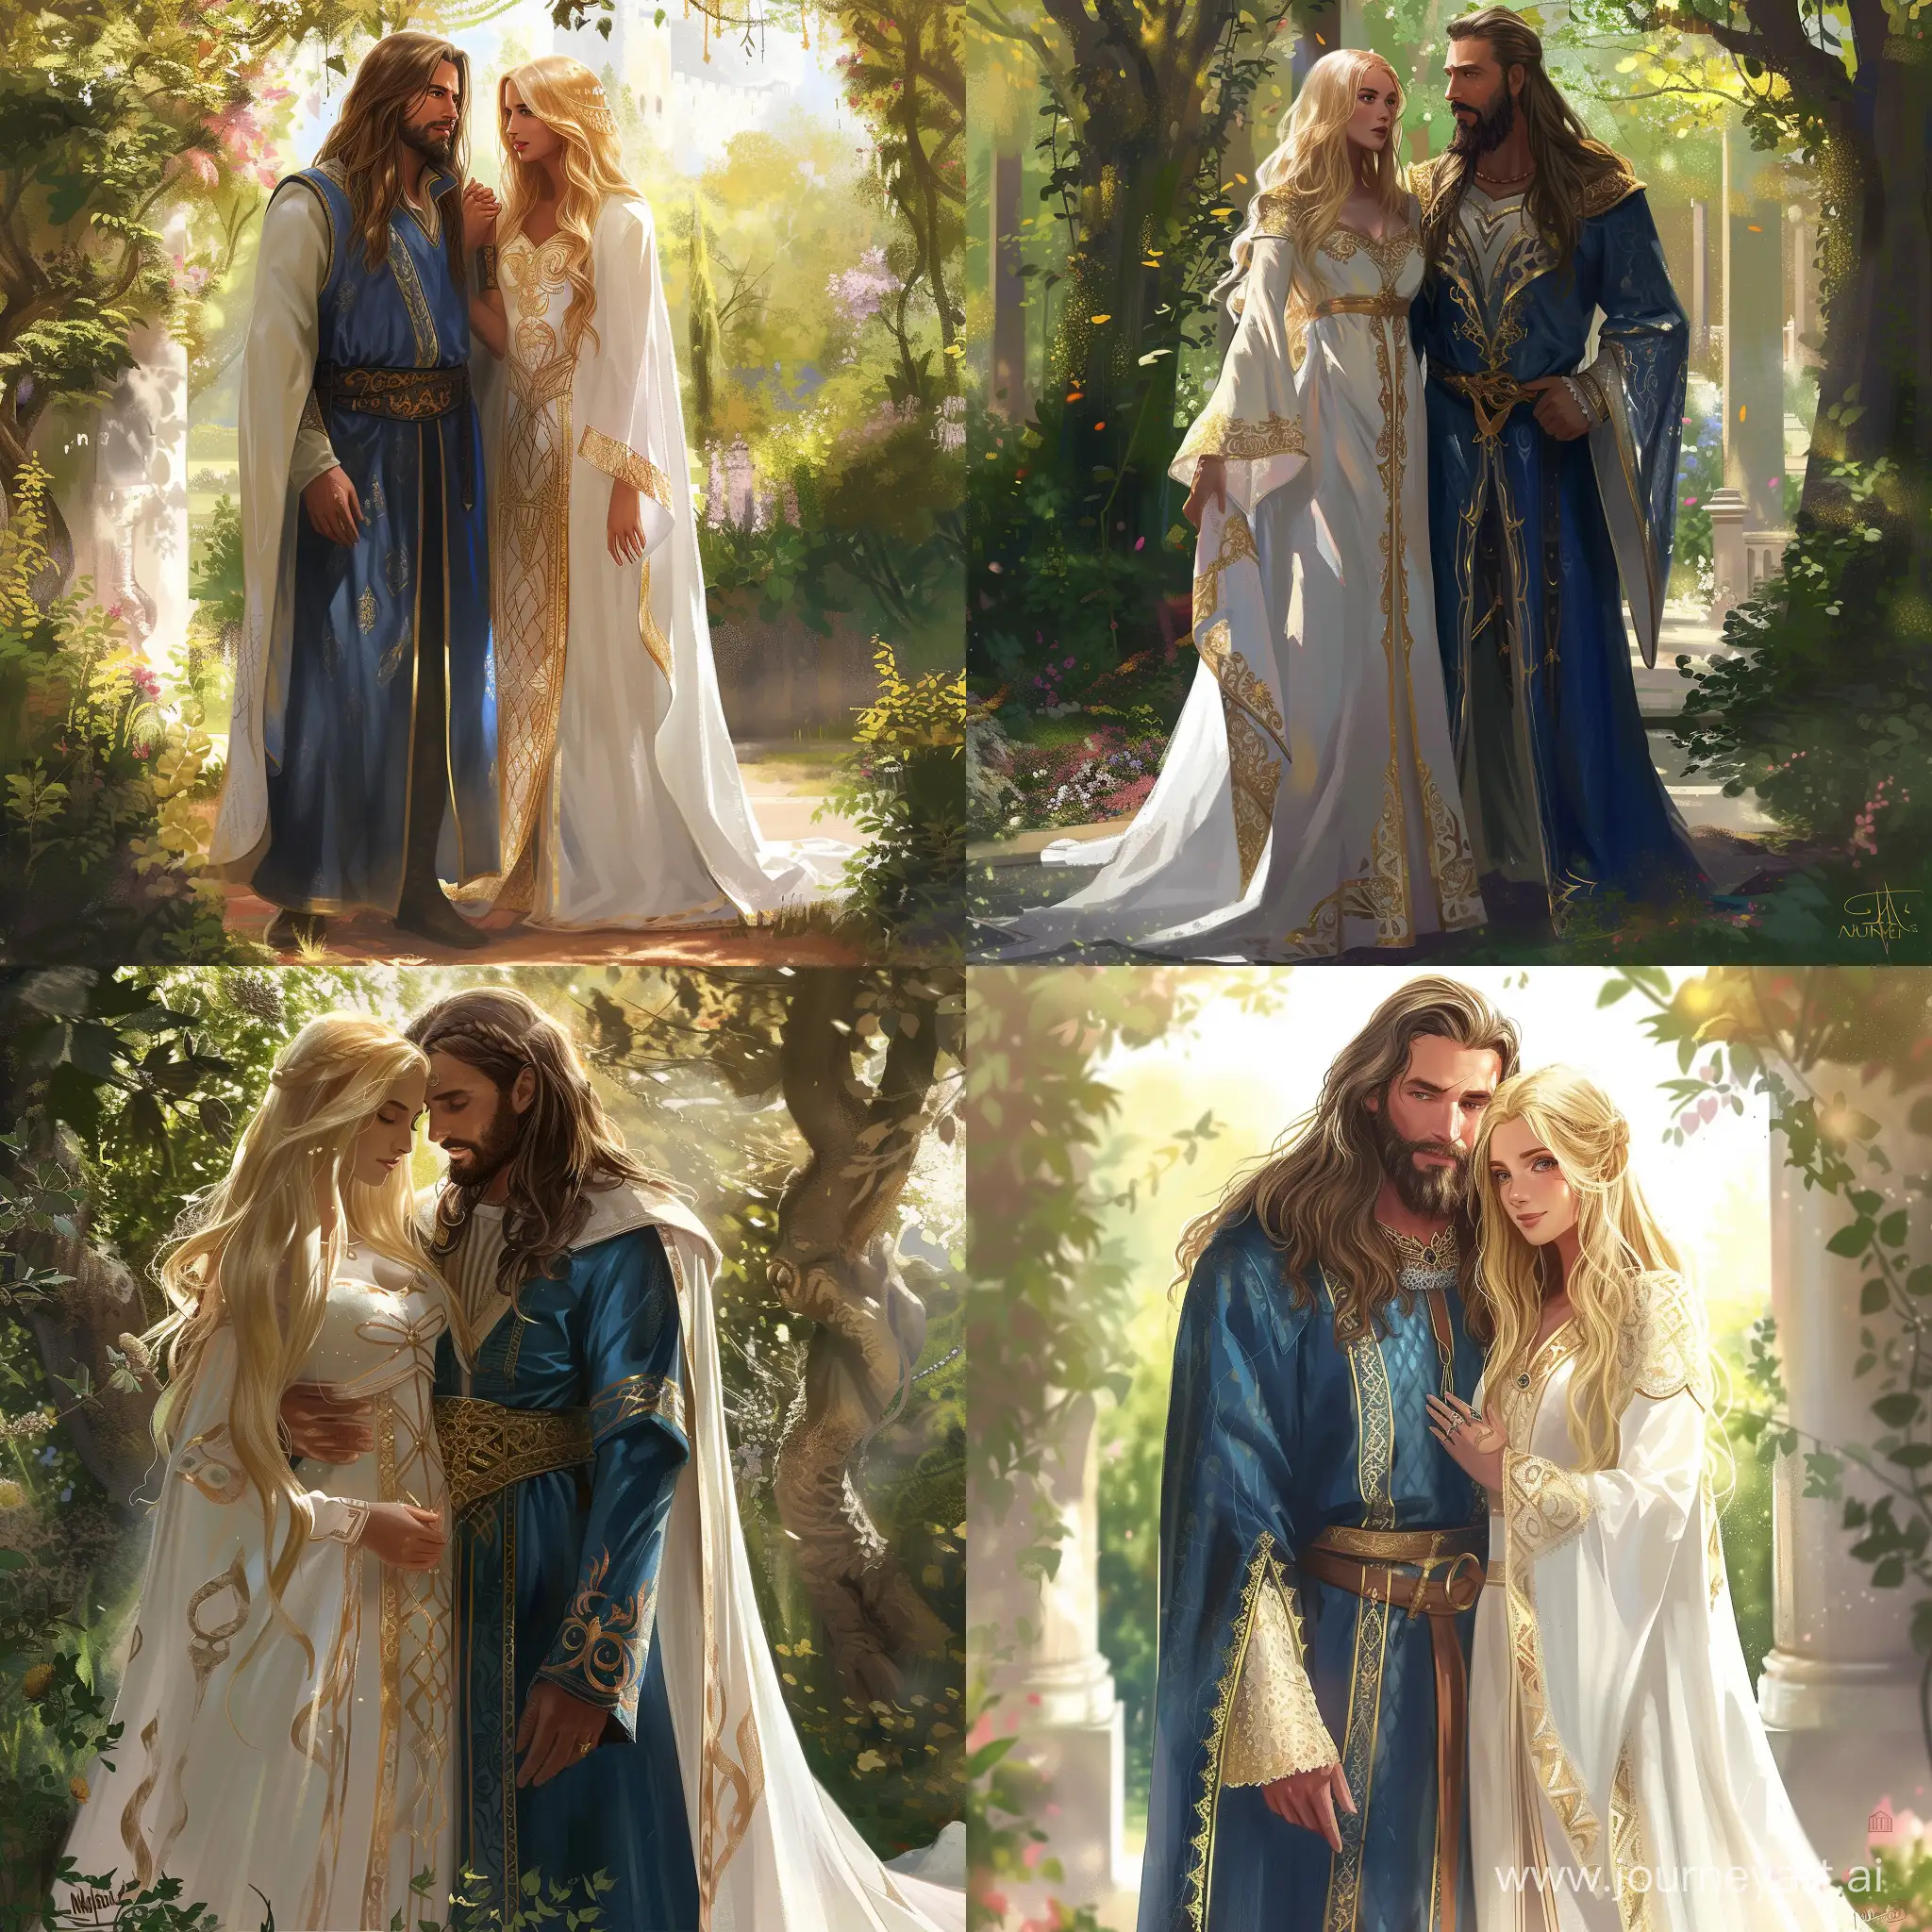 Romantic-Couple-in-Numenor-Blue-and-Golden-Robes-in-Royal-Garden